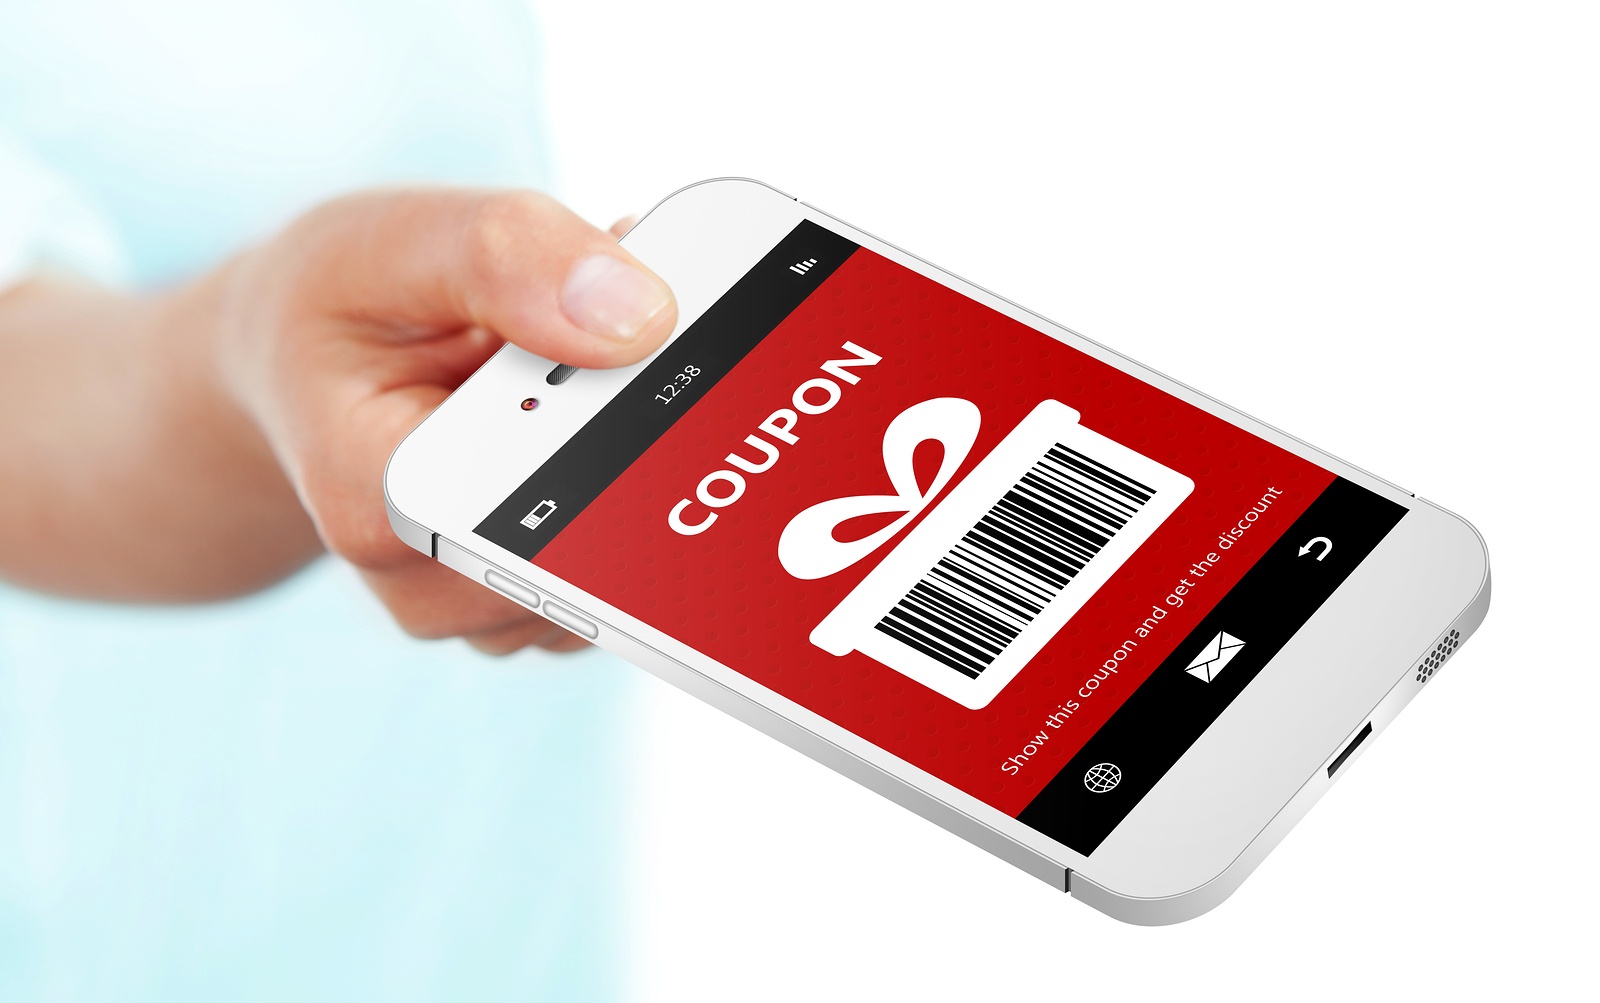 app-based promotions and digital coupons